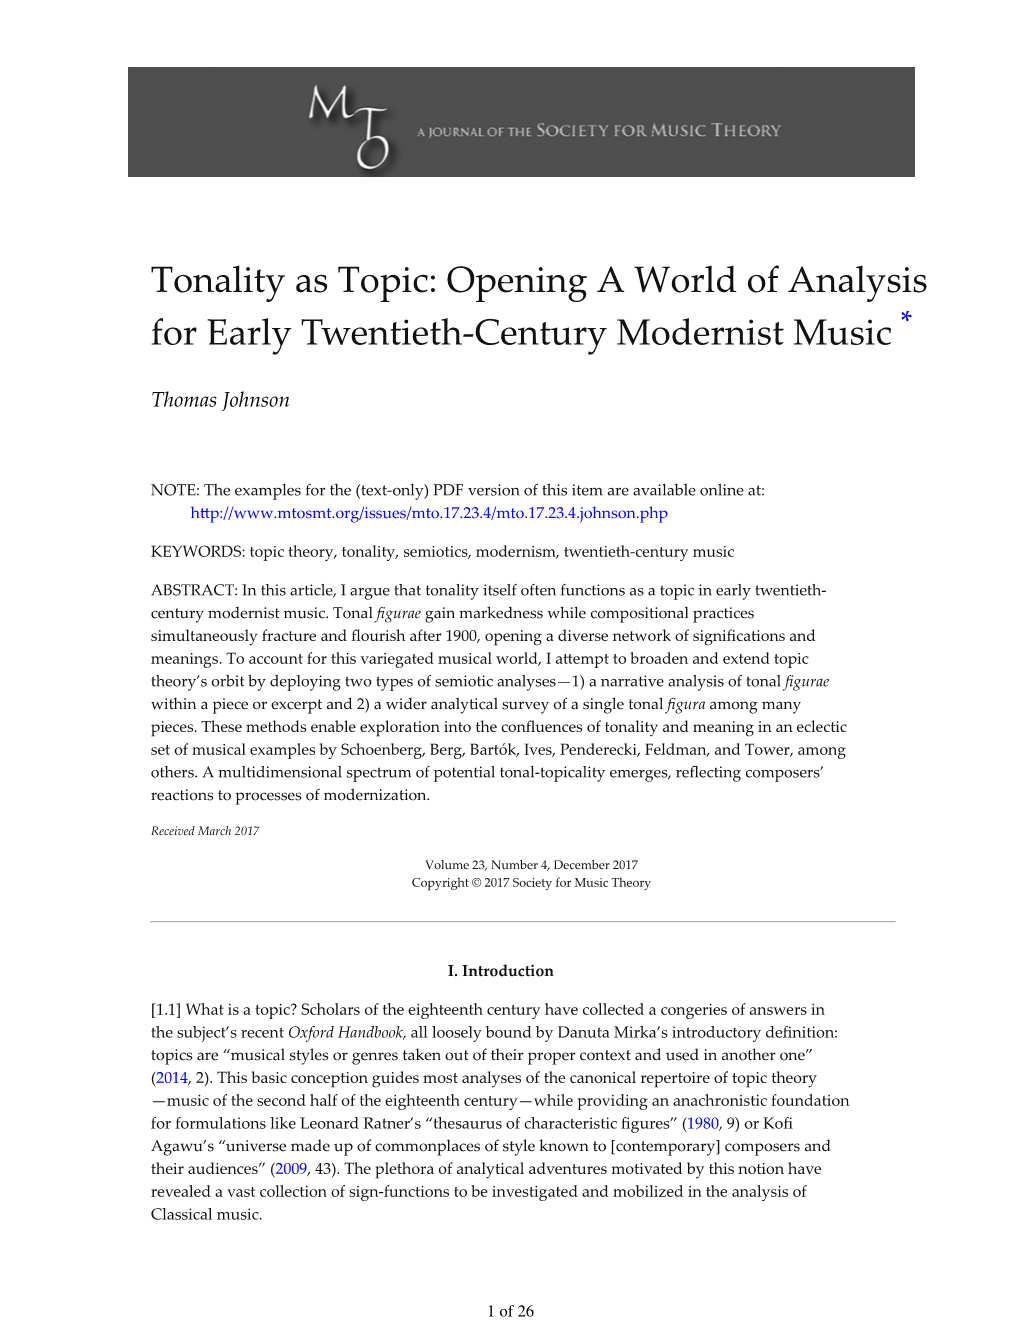 Tonality As Topic: Opening a World of Analysis for Early Twentieth-Century Modernist Music *